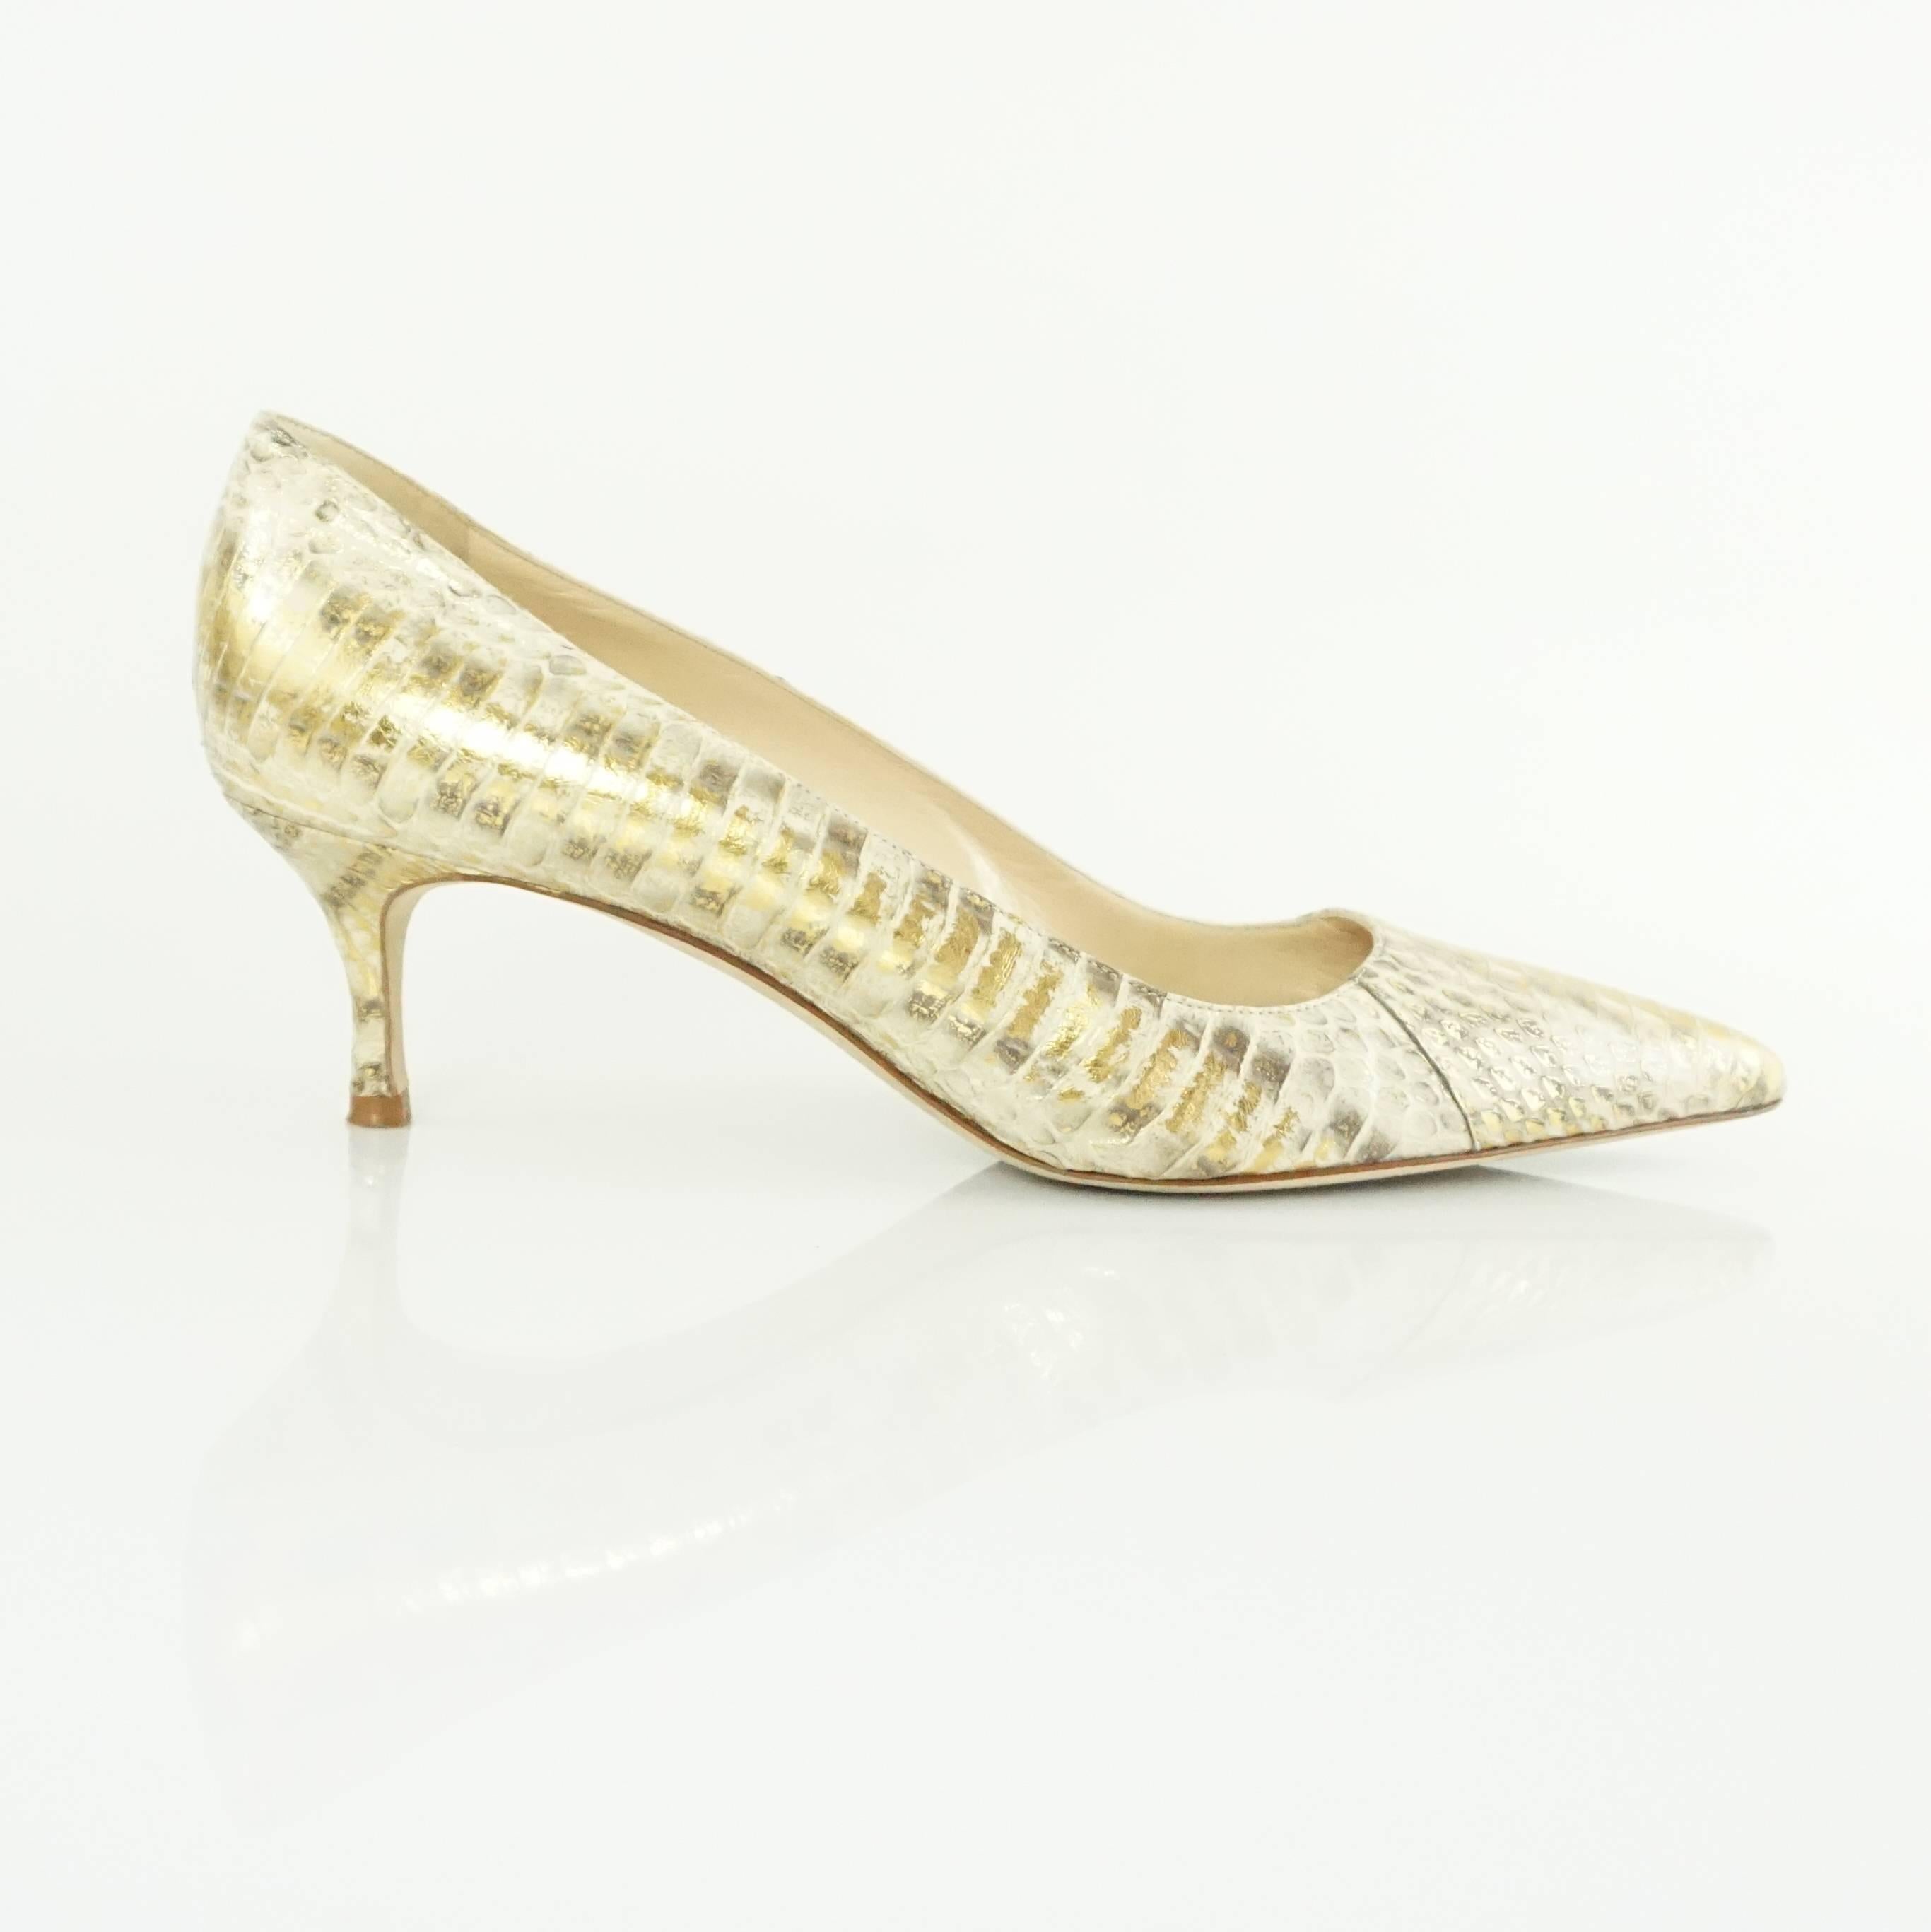 These Manolo Blahnik pointed toe pumps are made of gold python and have a kitten heel. They are in very good condition with some bottom wear and minor wear.

Measurement
Heel Height: 2